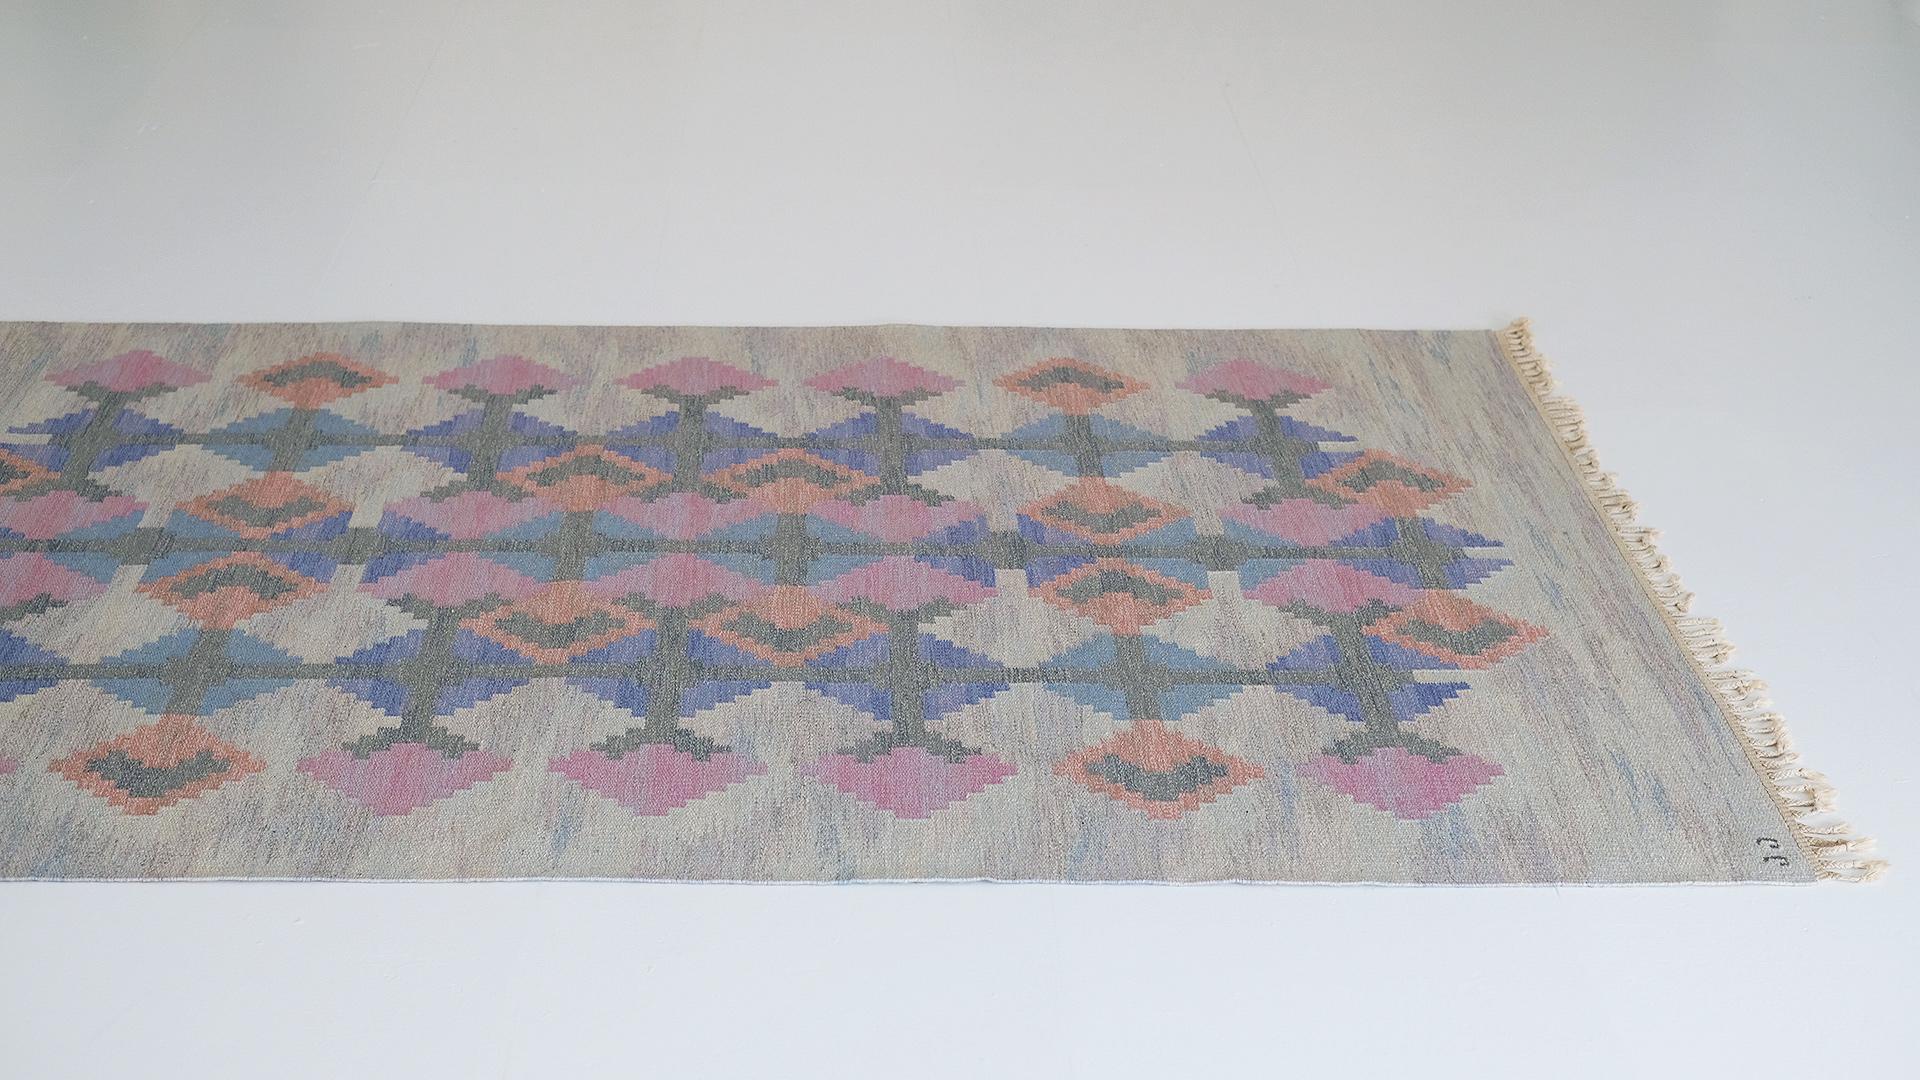 Large Swedish Flat Weave Carpet by Judith Johansson In Good Condition For Sale In Epperstone, Nottinghamshire